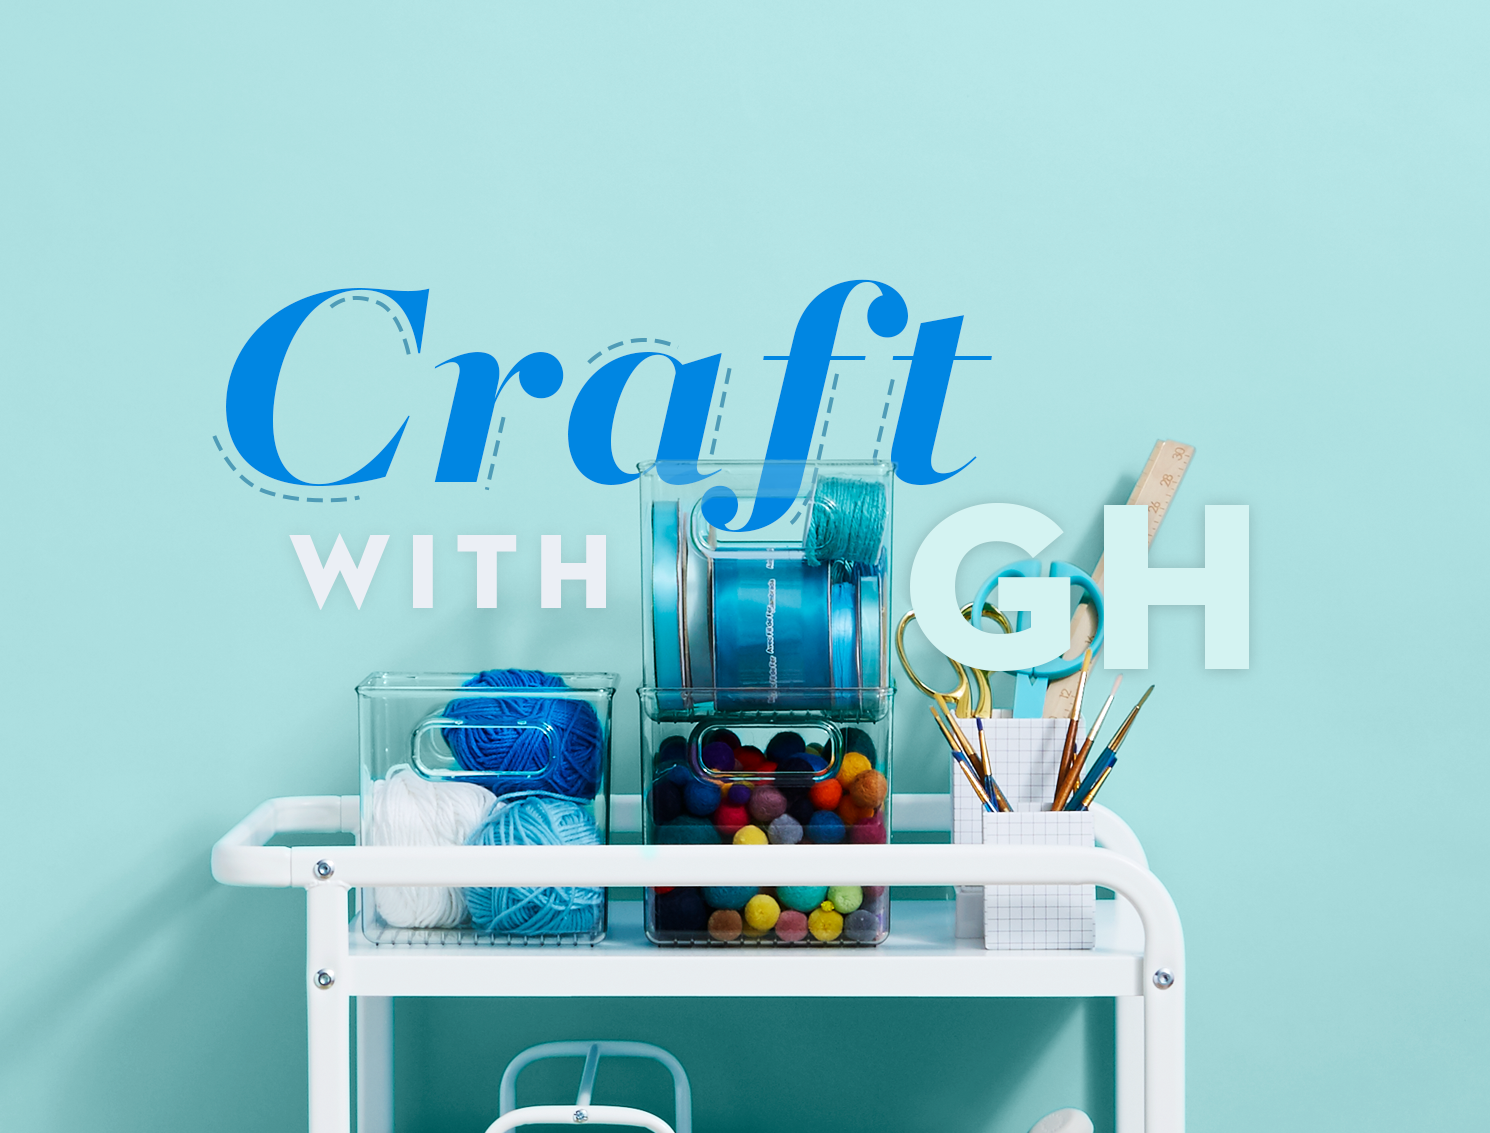 Good Housekeeping Is Hosting Free Craft Classes For Kids On Facebook